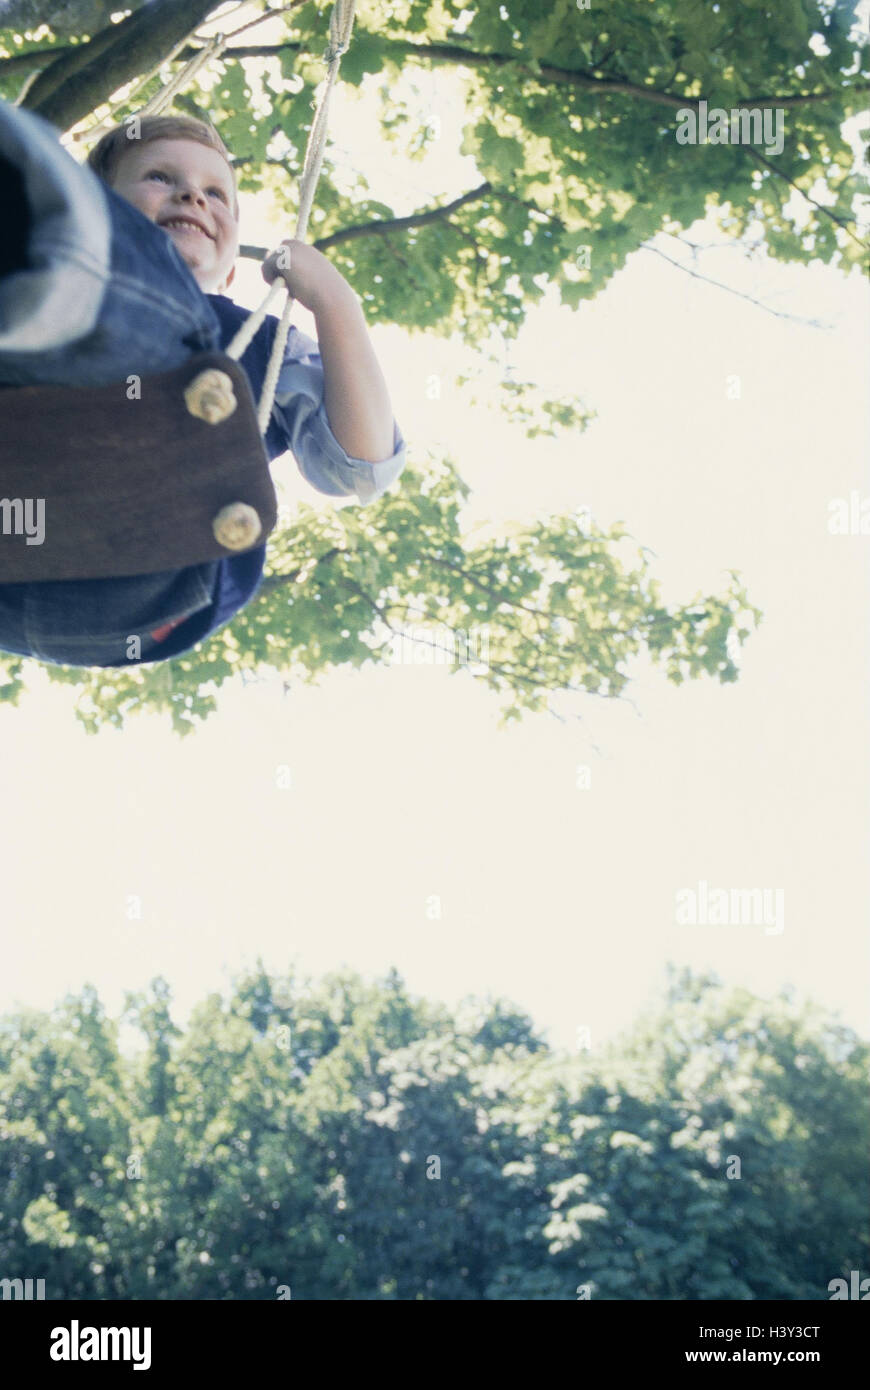 Tree, boy, swing, detail, from, below, model released, summers, tree top, branches, leaves, child, leisure time, fun, play, game, swing, springboard swing, wooden springboard swing, wooden swing, leather Stock Photo